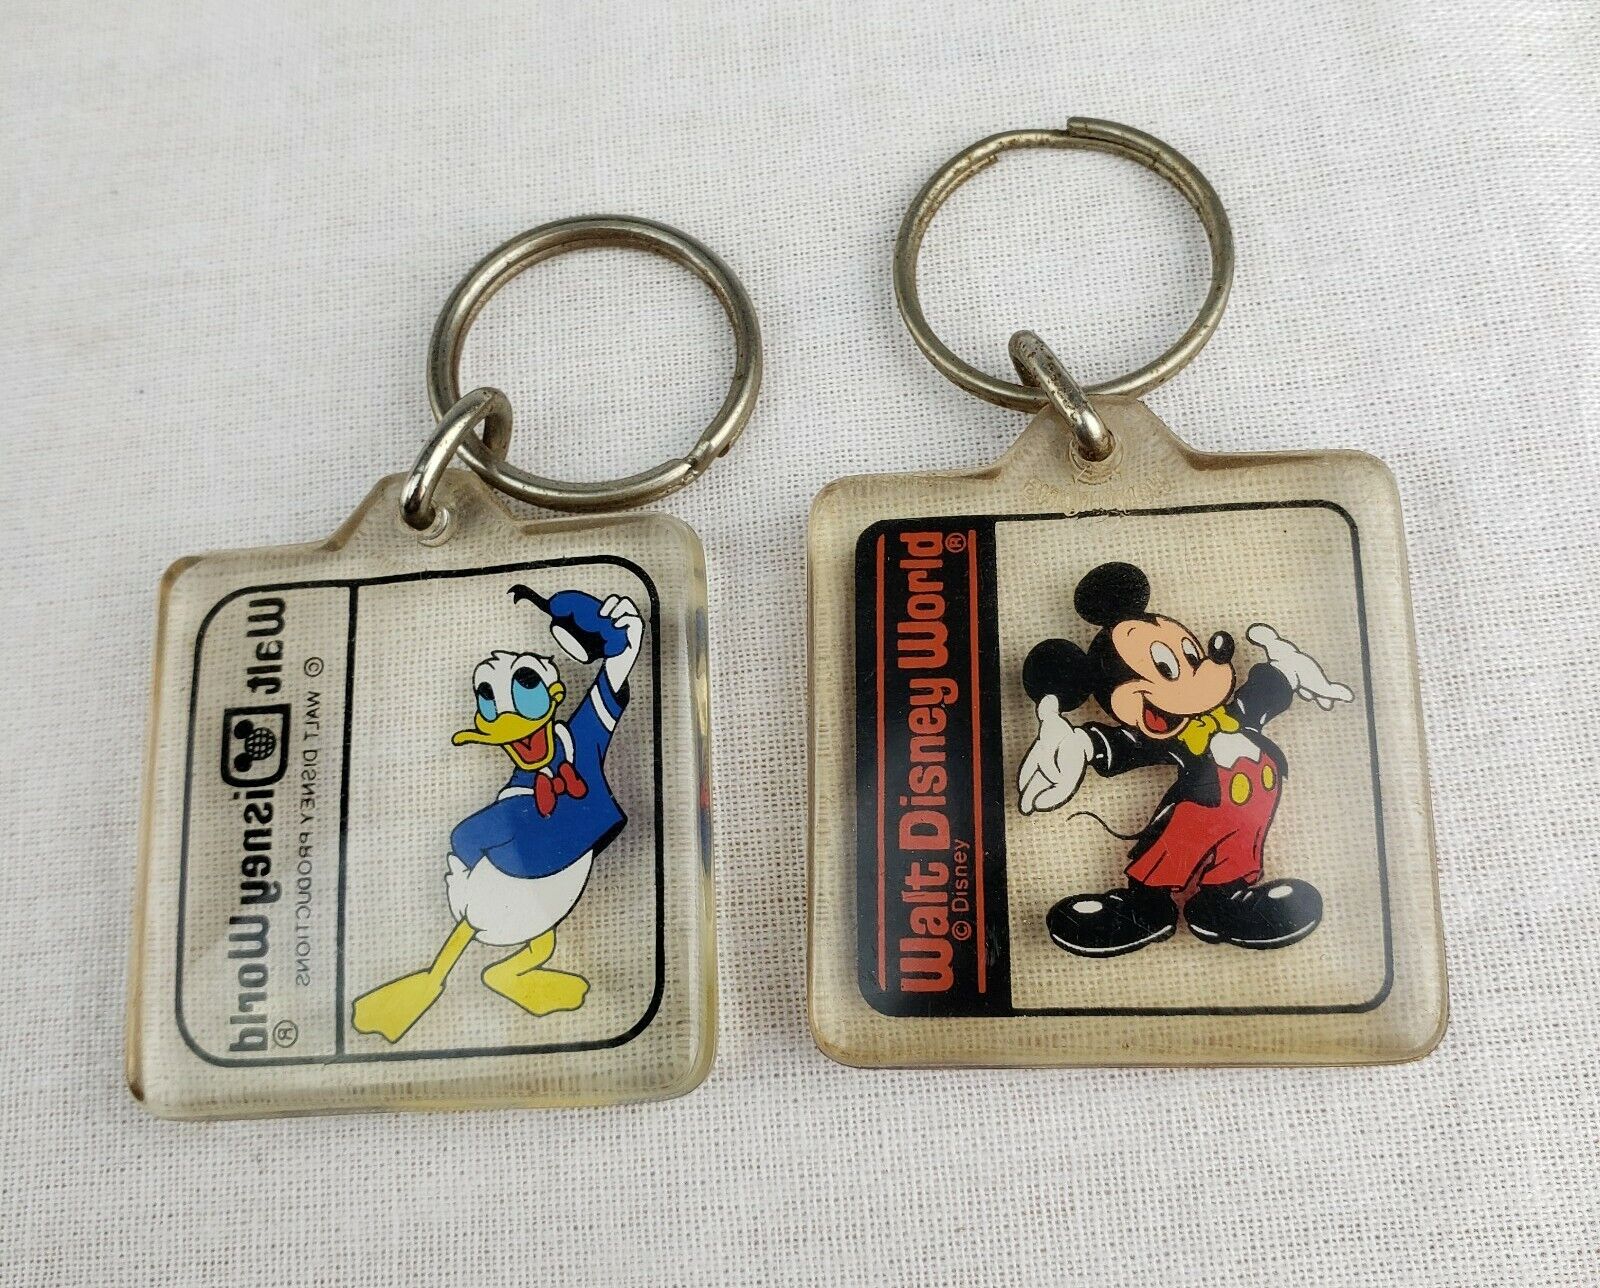 Rare Vintage Walt Disney World Mickey Mouse & Donald Duck Key Chains Lot of 2